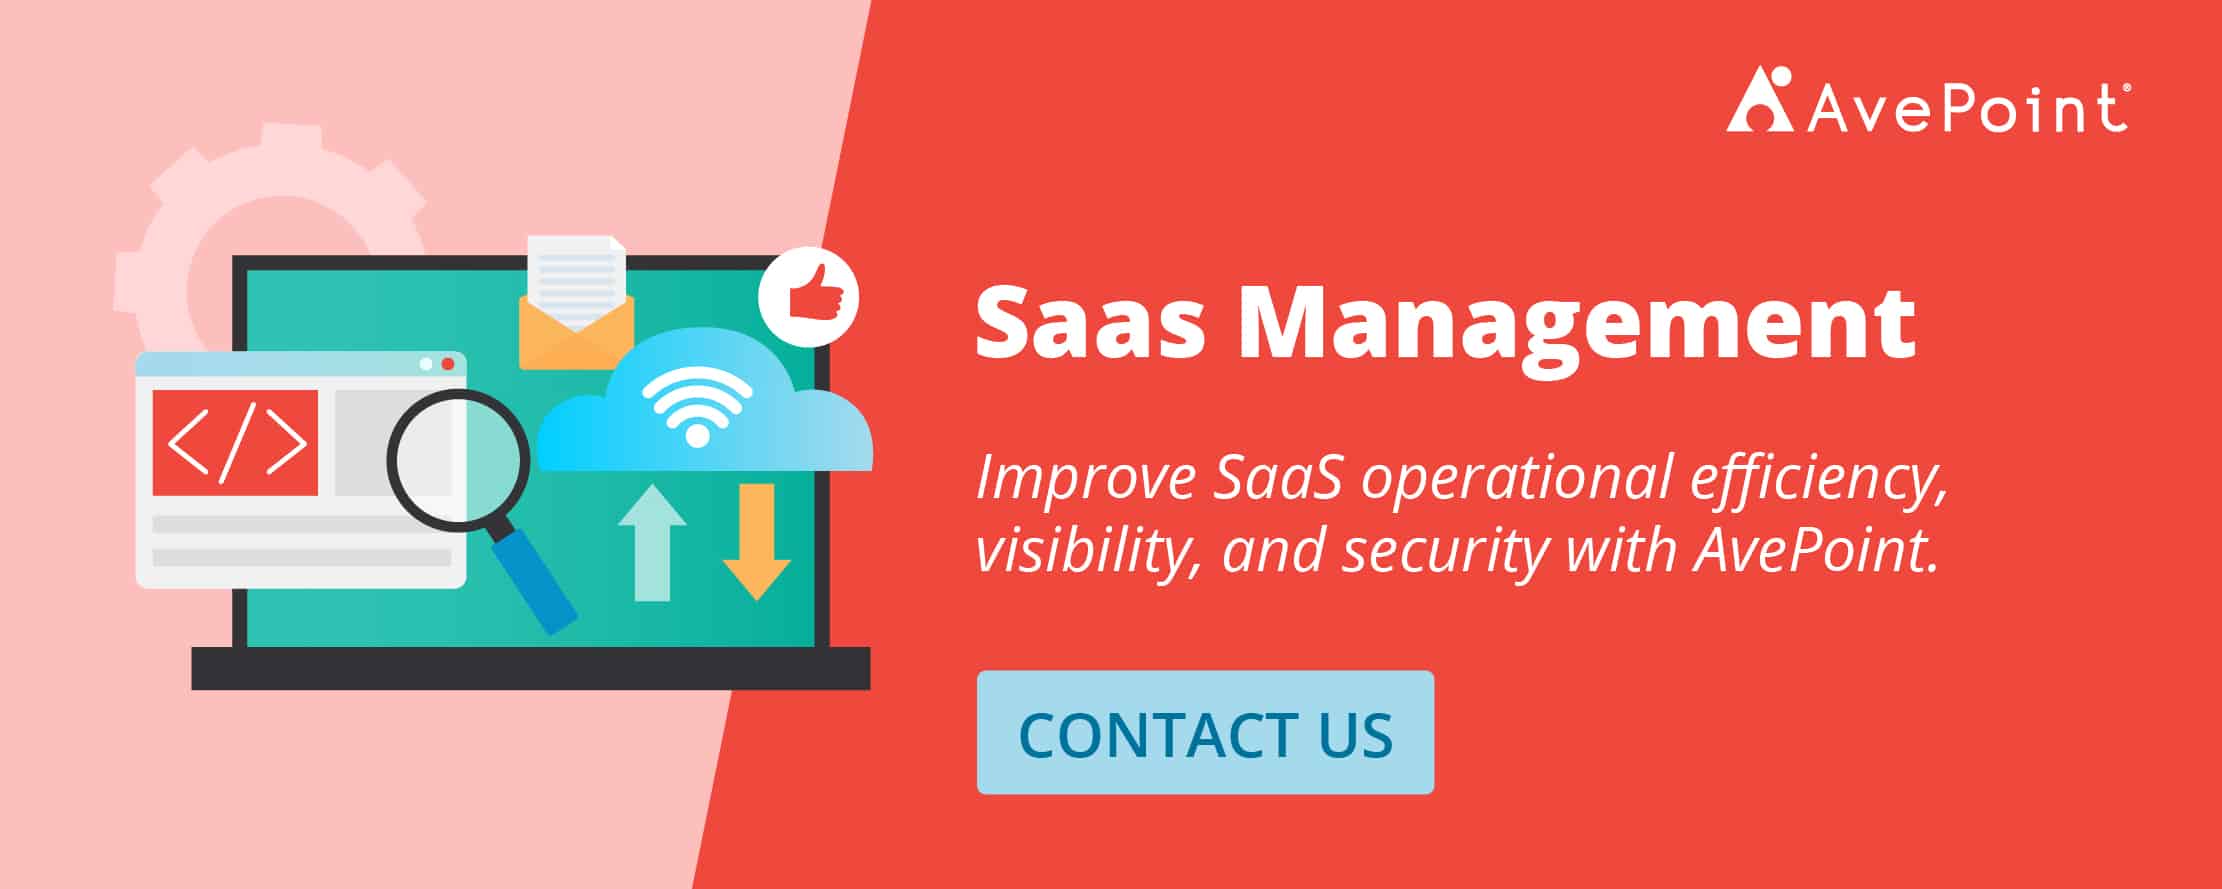 avepoint-saas-management-solution